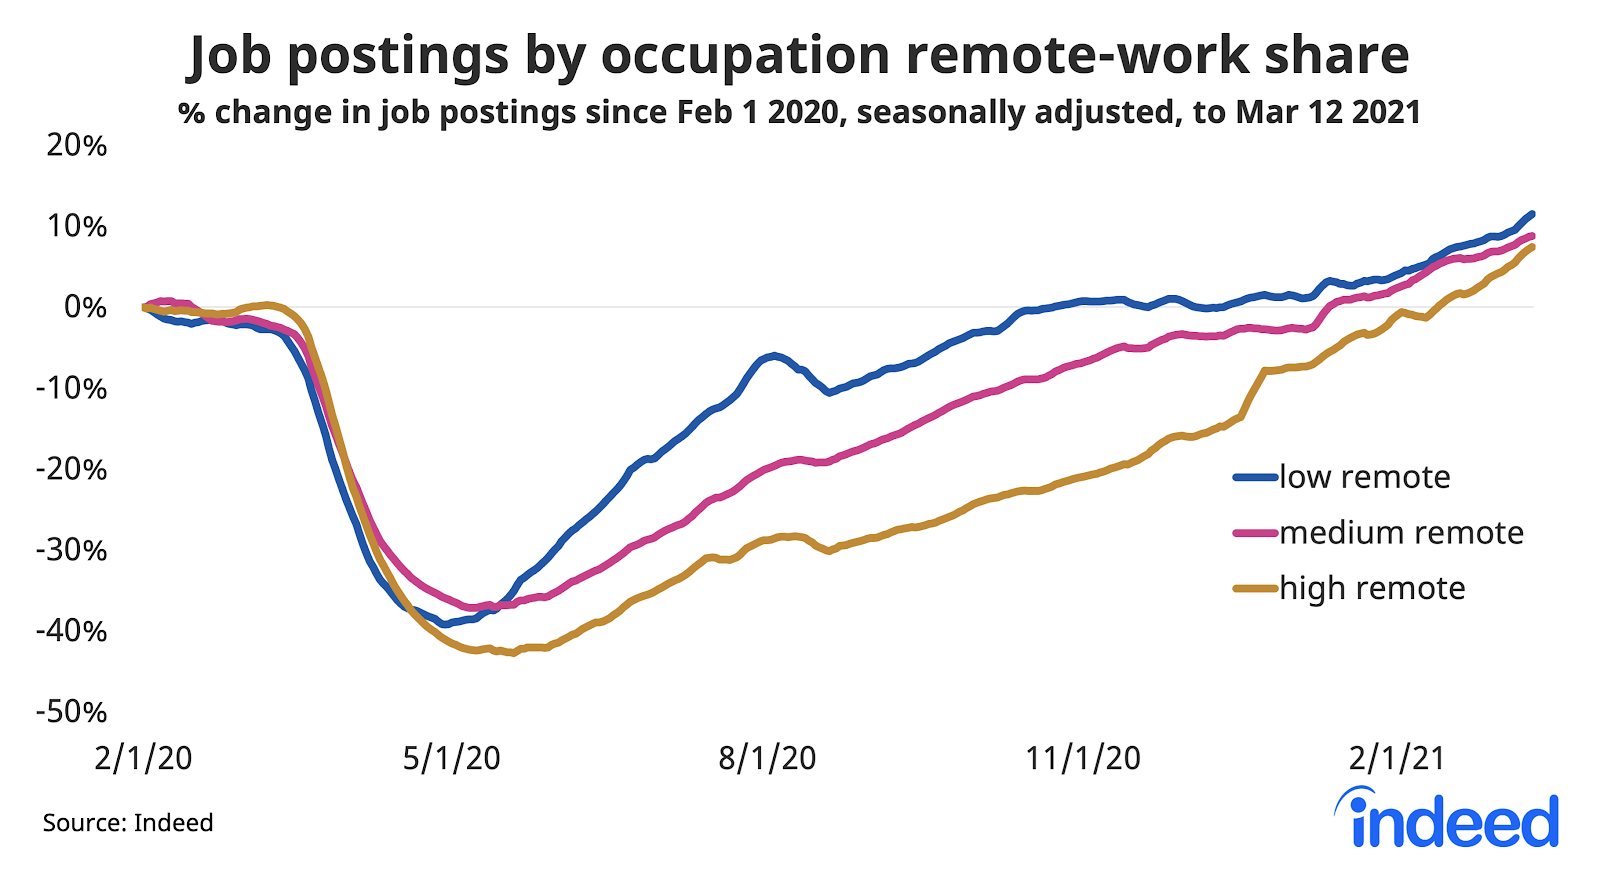 Line graph showing job postings by occupation remote-work share